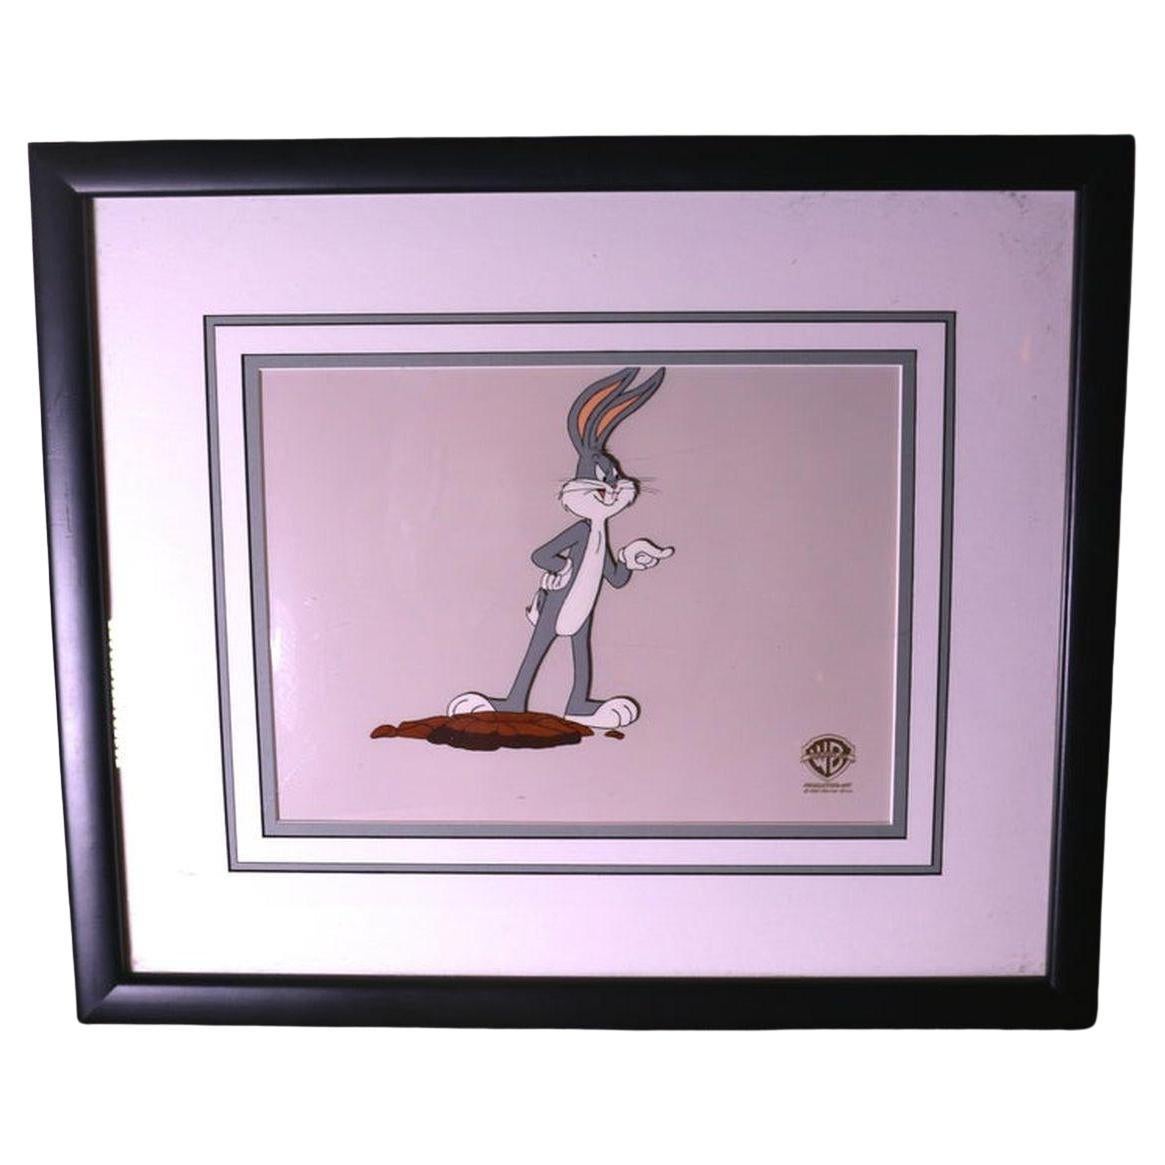 1970s Warner Brothers Single Cell Image of Bugs Bunny For Sale